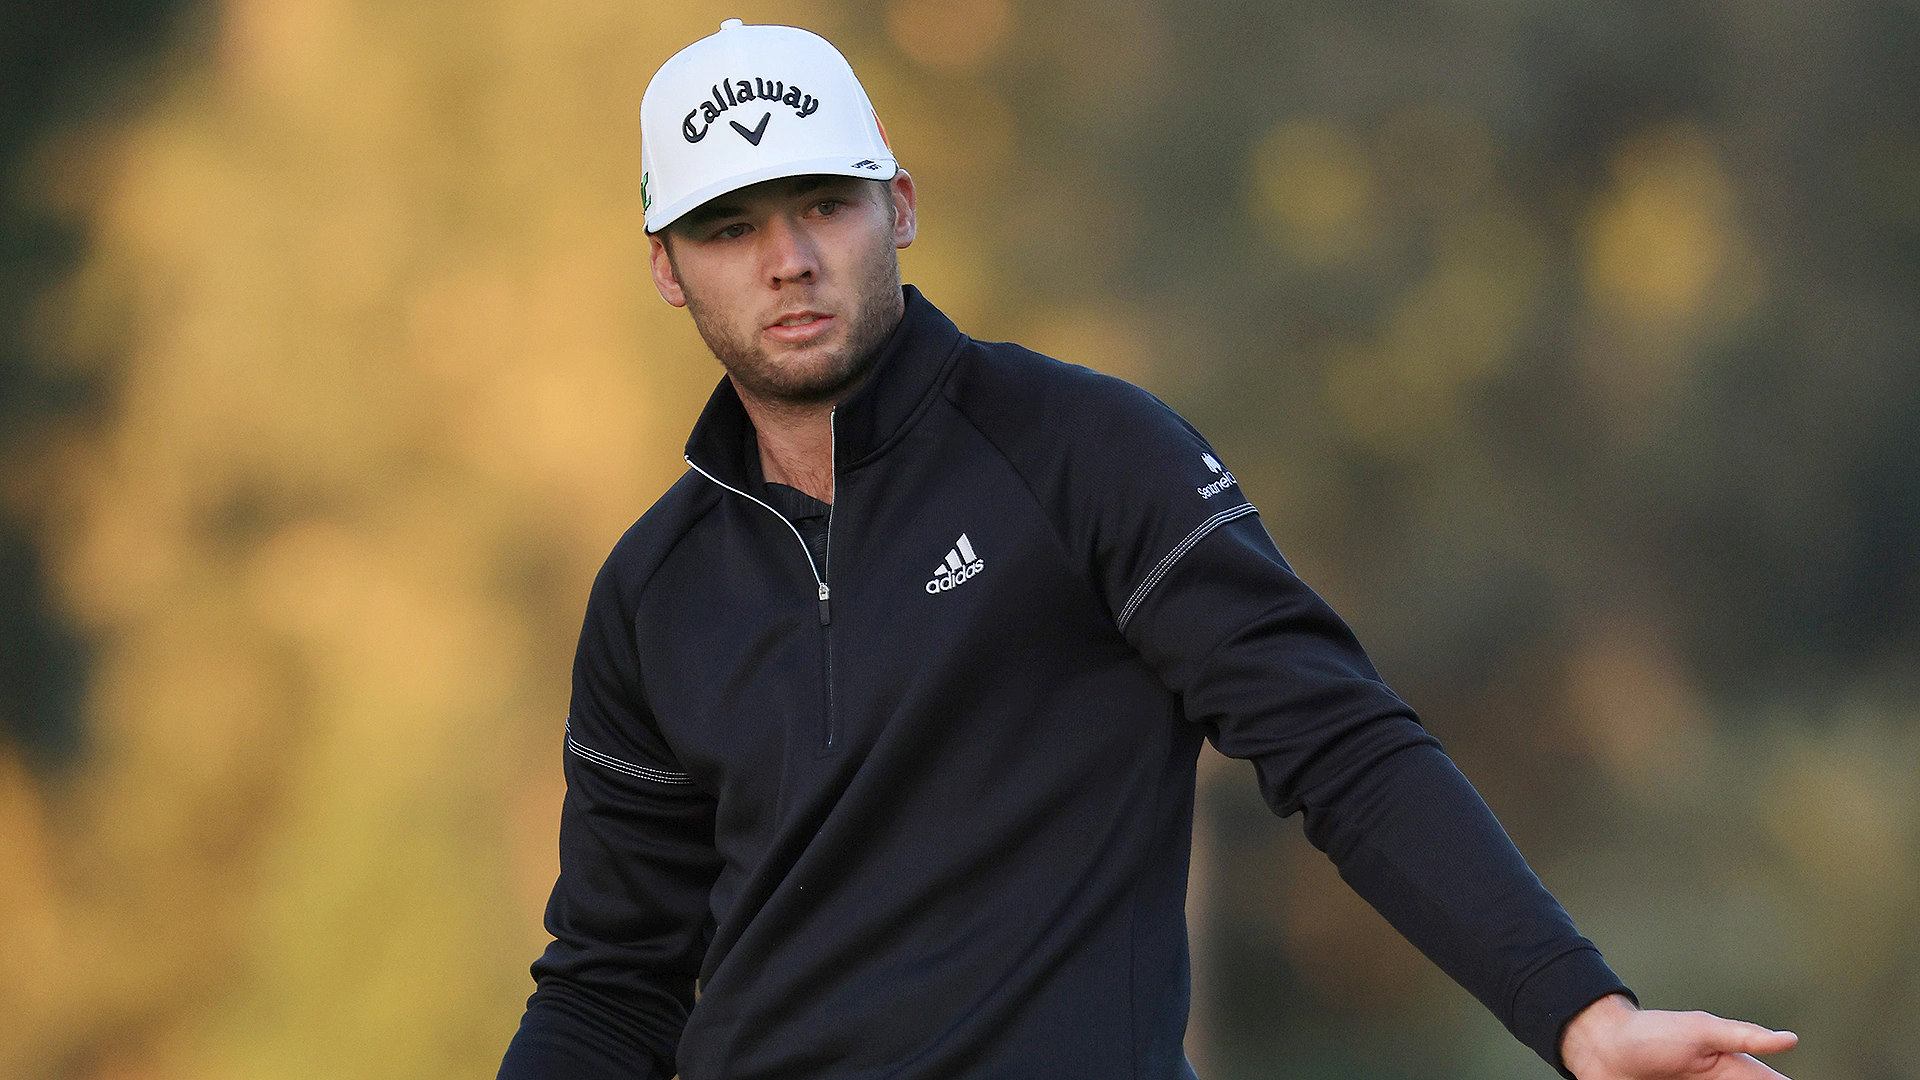 Sam Burns hangs on for lead over Dustin Johnson and Co. entering Genesis final round